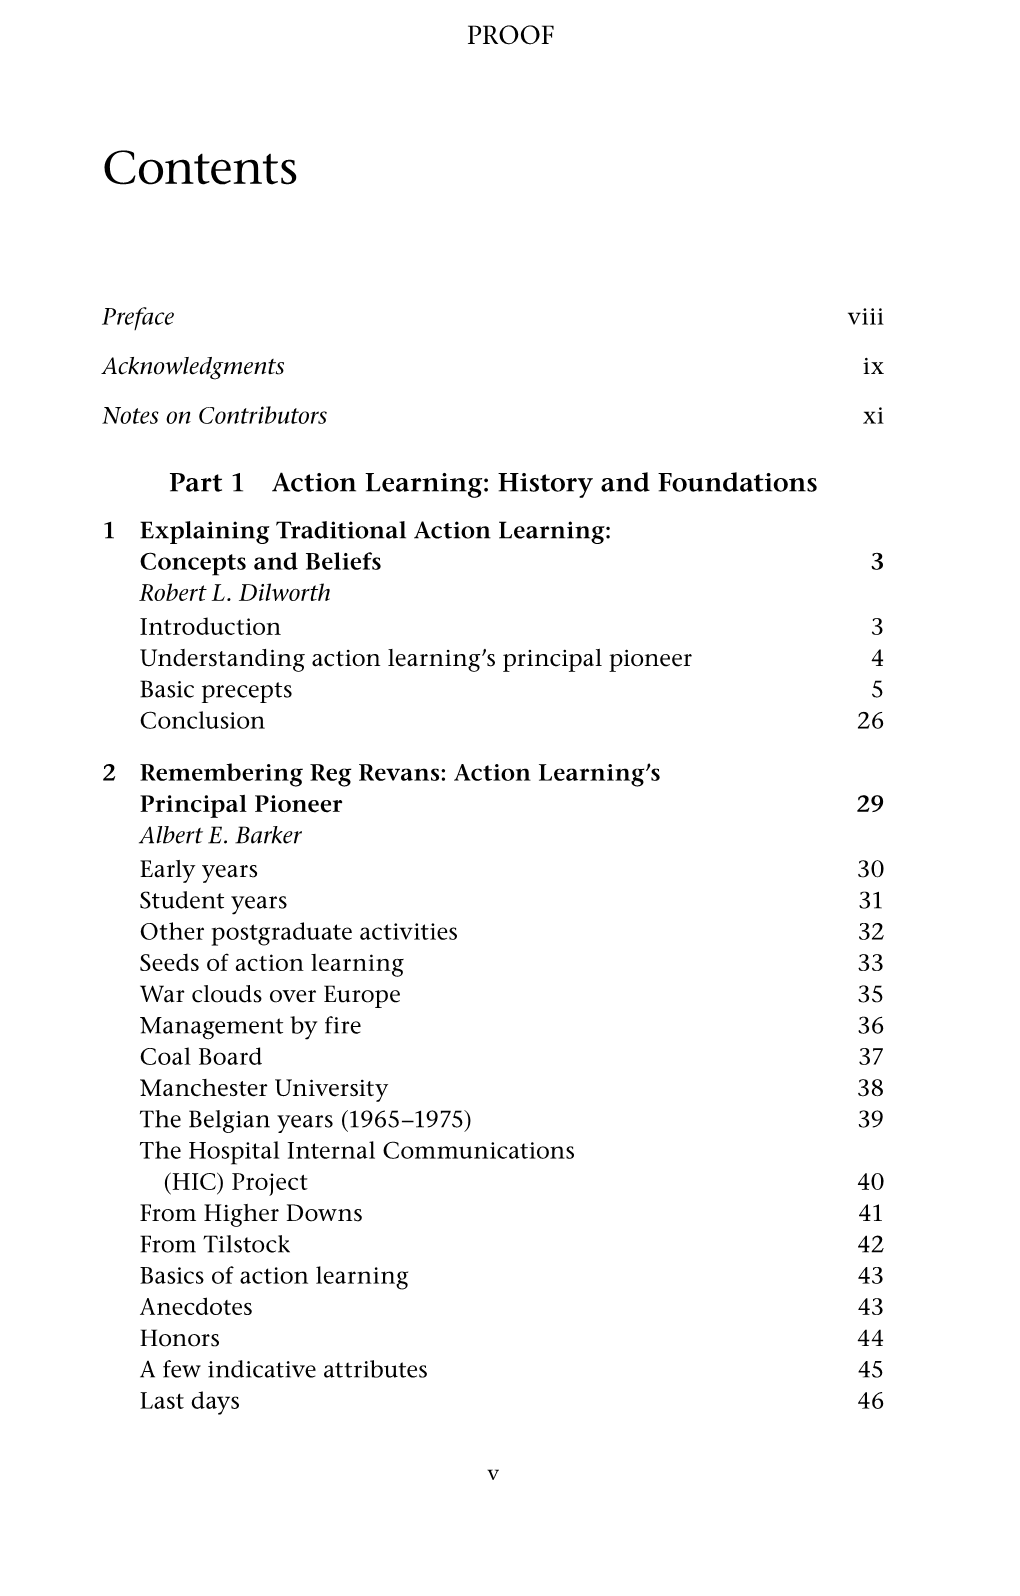 Part 1 Action Learning: History and Foundations 1 Explaining Traditional Action Learning: Concepts and Beliefs 3 Robert L